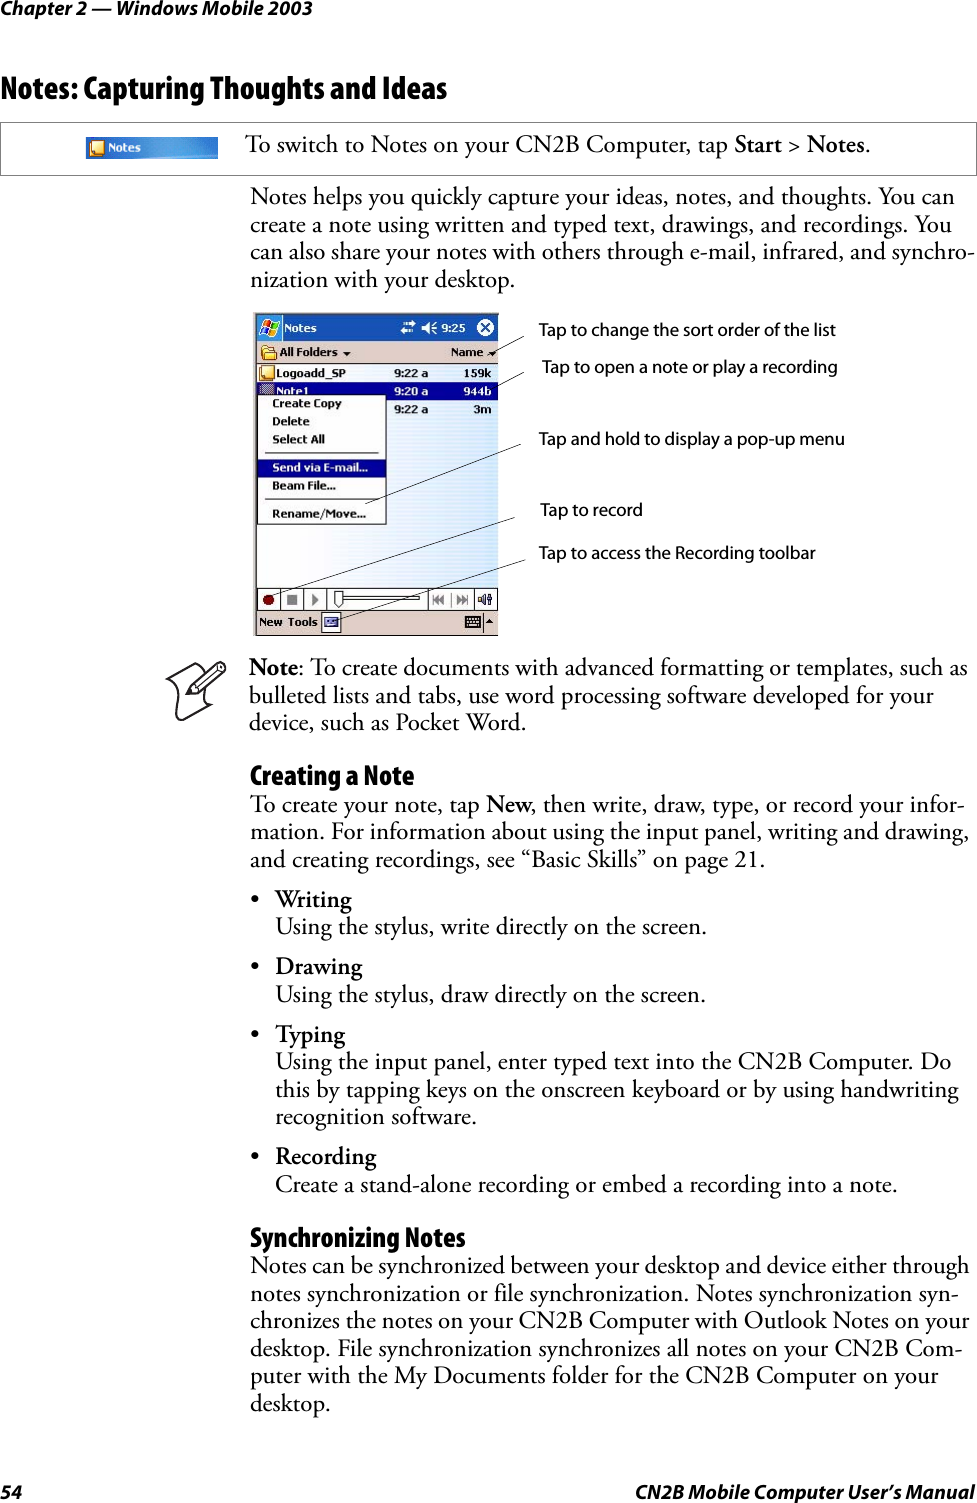 Chapter 2 — Windows Mobile 200354 CN2B Mobile Computer User’s ManualNotes: Capturing Thoughts and IdeasNotes helps you quickly capture your ideas, notes, and thoughts. You can create a note using written and typed text, drawings, and recordings. You can also share your notes with others through e-mail, infrared, and synchro-nization with your desktop.Creating a NoteTo create your note, tap New, then write, draw, type, or record your infor-mation. For information about using the input panel, writing and drawing, and creating recordings, see “Basic Skills” on page 21.•WritingUsing the stylus, write directly on the screen.•DrawingUsing the stylus, draw directly on the screen.•TypingUsing the input panel, enter typed text into the CN2B Computer. Do this by tapping keys on the onscreen keyboard or by using handwriting recognition software.•RecordingCreate a stand-alone recording or embed a recording into a note.Synchronizing NotesNotes can be synchronized between your desktop and device either through notes synchronization or file synchronization. Notes synchronization syn-chronizes the notes on your CN2B Computer with Outlook Notes on your desktop. File synchronization synchronizes all notes on your CN2B Com-puter with the My Documents folder for the CN2B Computer on your desktop.To switch to Notes on your CN2B Computer, tap Start &gt; Notes.Note: To create documents with advanced formatting or templates, such as bulleted lists and tabs, use word processing software developed for your device, such as Pocket Word.Tap to change the sort order of the listTap to open a note or play a recordingTap and hold to display a pop-up menuTap to recordTap to access the Recording toolbar